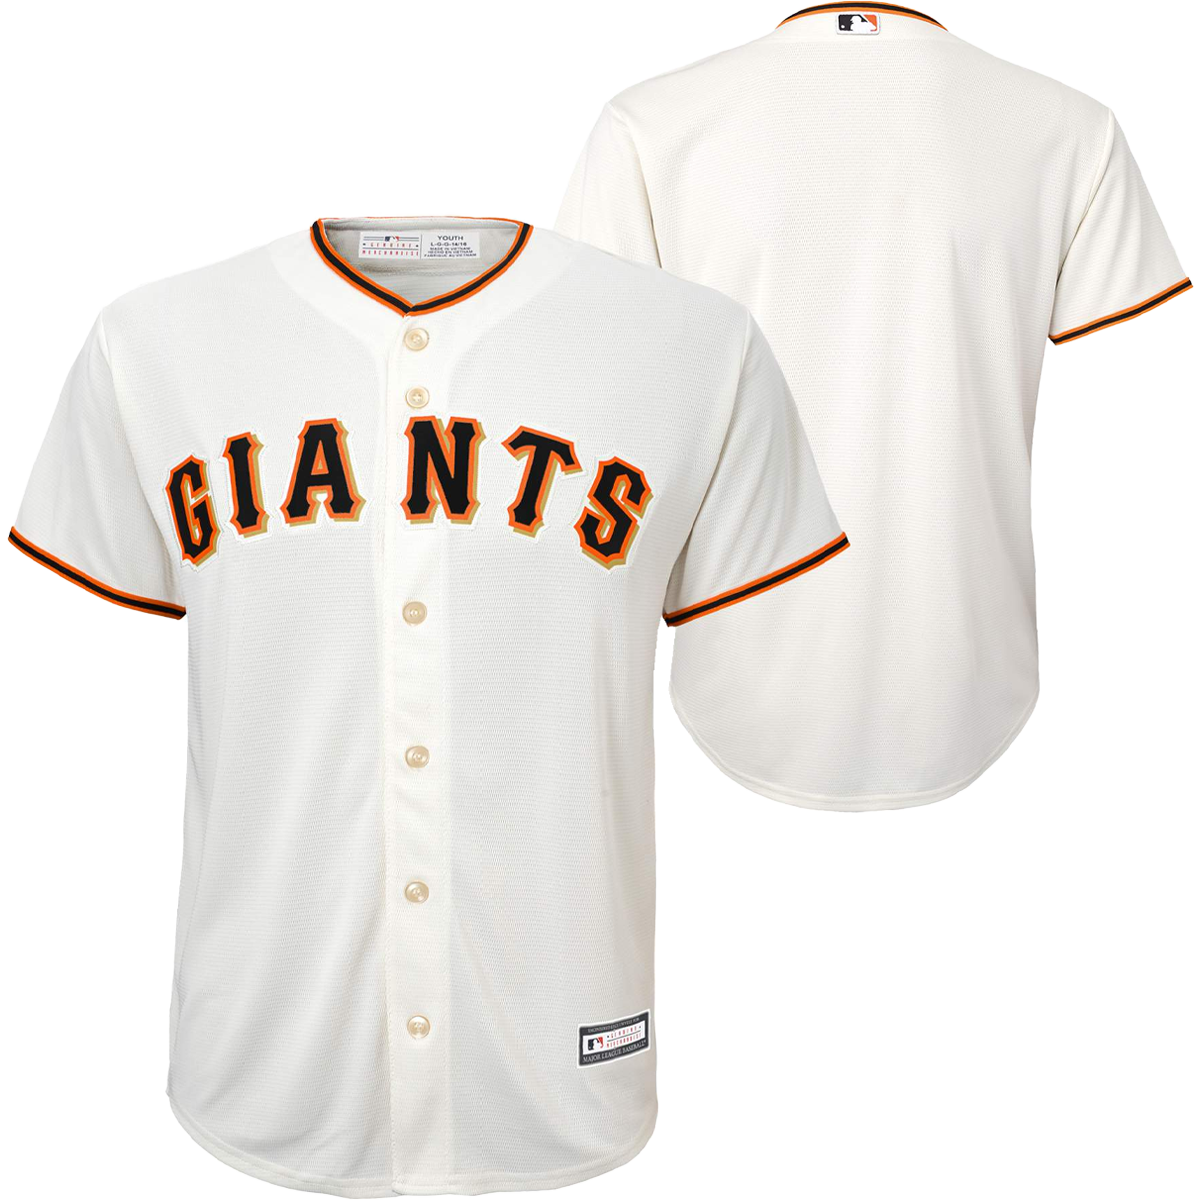 Youth Giants Sanitized Home Jersey